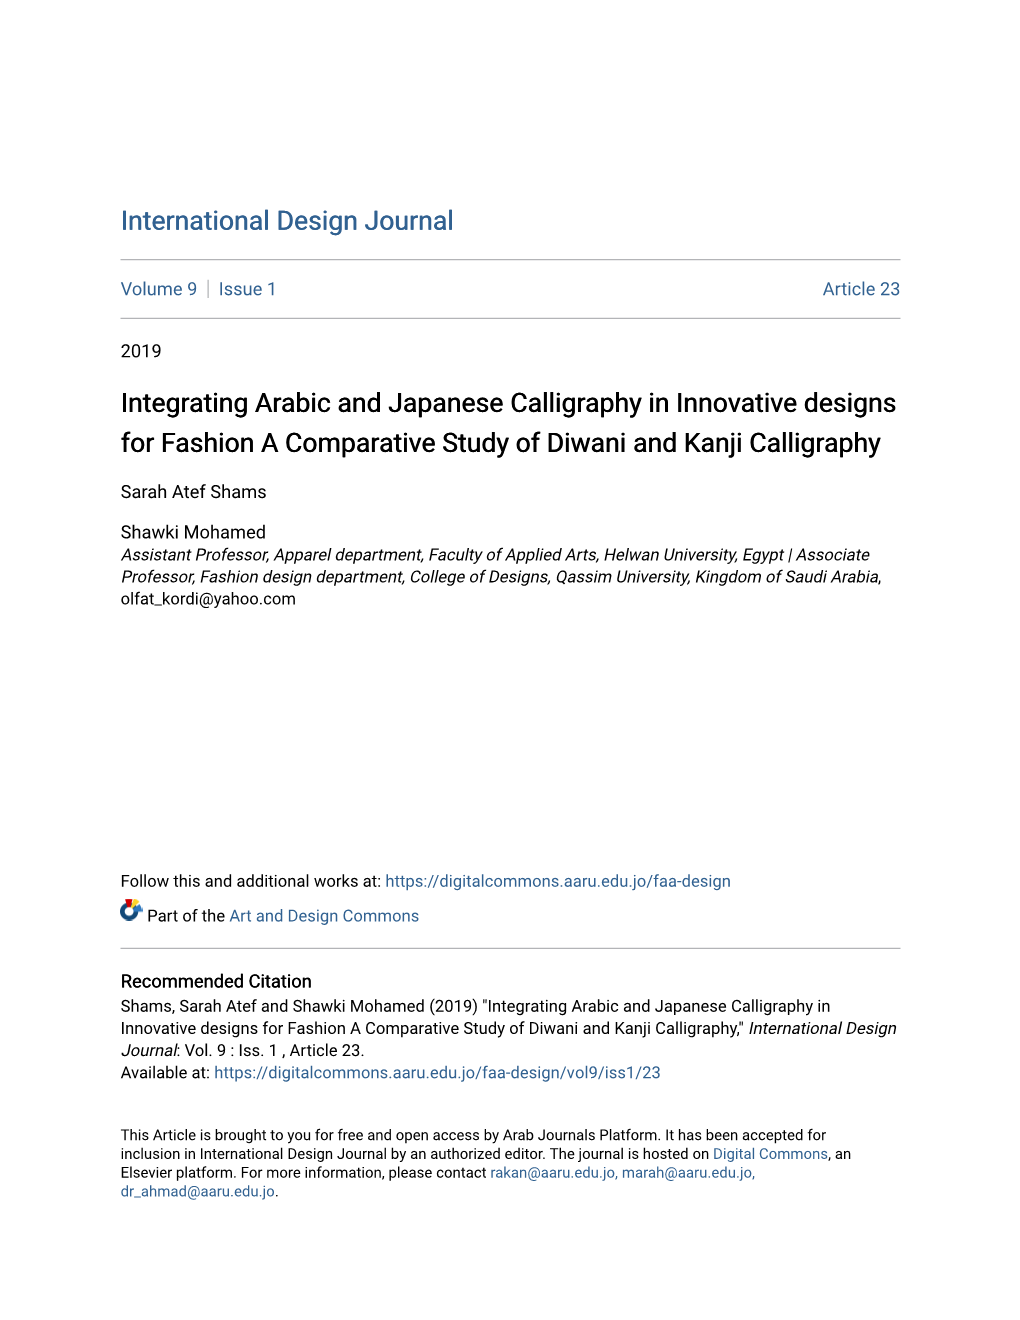 Integrating Arabic and Japanese Calligraphy in Innovative Designs for Fashion a Comparative Study of Diwani and Kanji Calligraphy